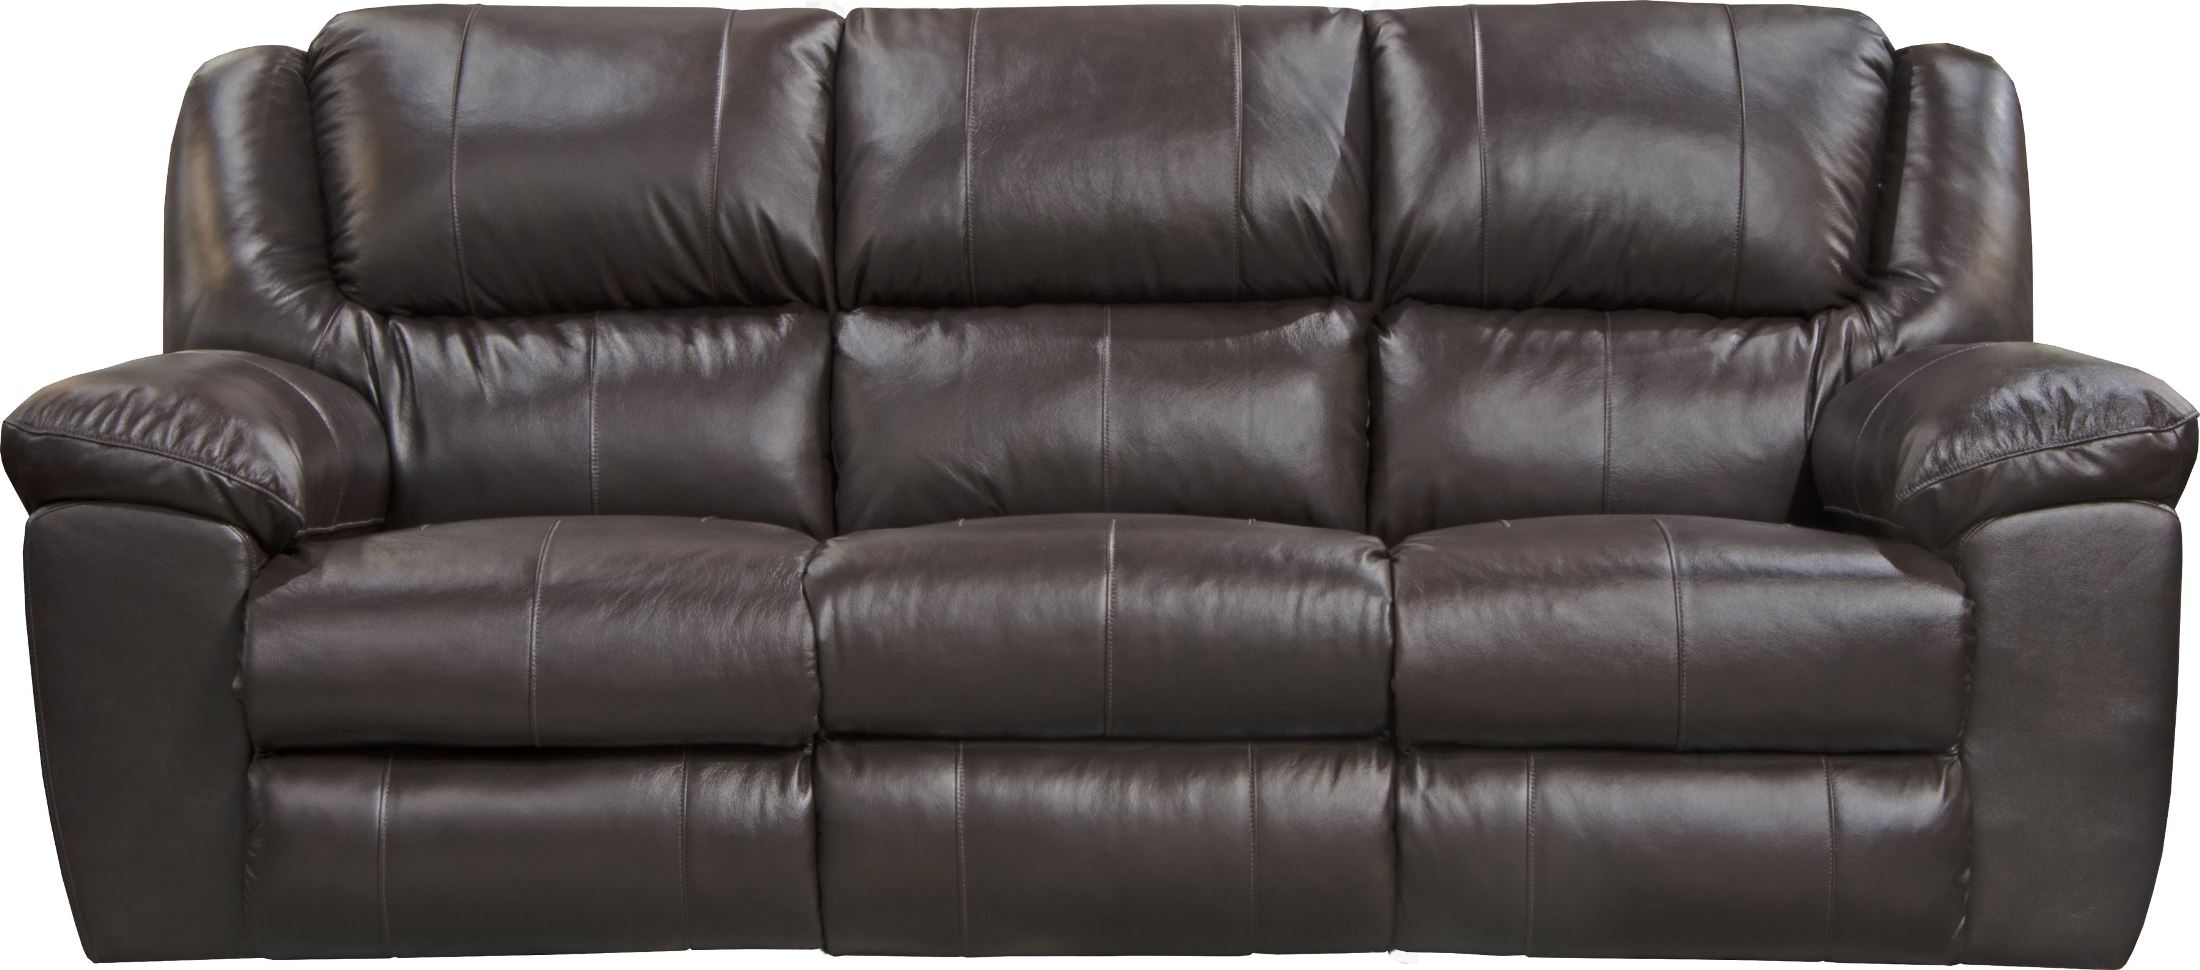 Ultimate Reclining Sofa By Catnapper